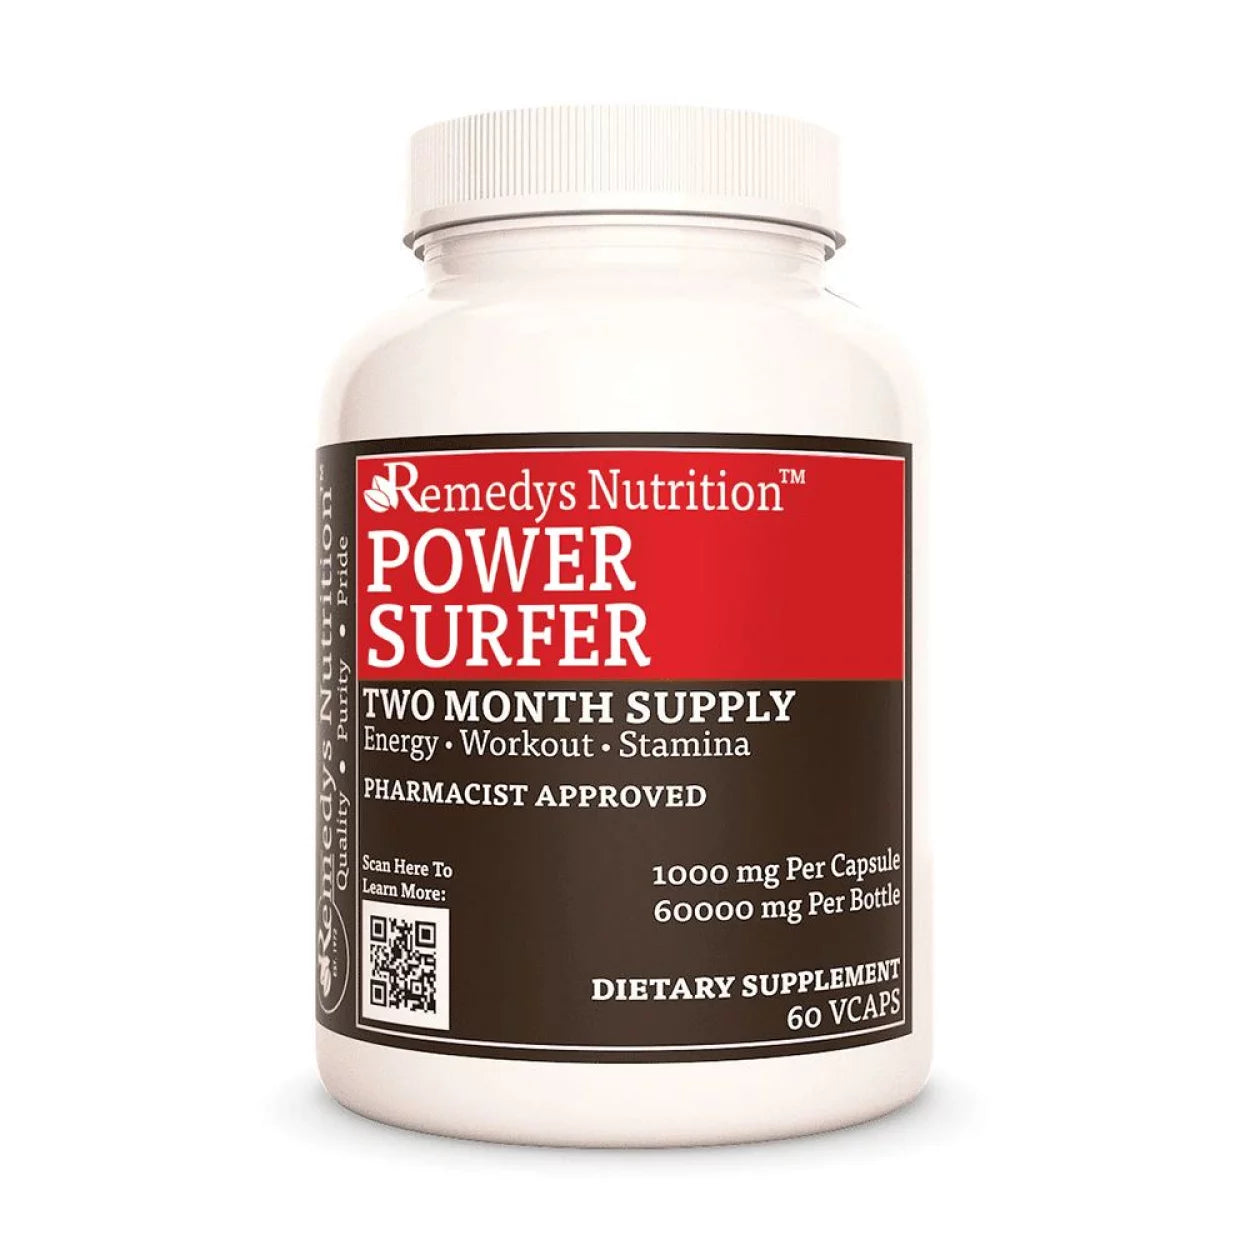 Image of Remedy's Nutrition® Power Surfer™ Capsules Herbal Dietary Supplement bottle. Made in USA. Guarana, Maca, Rhodiola.